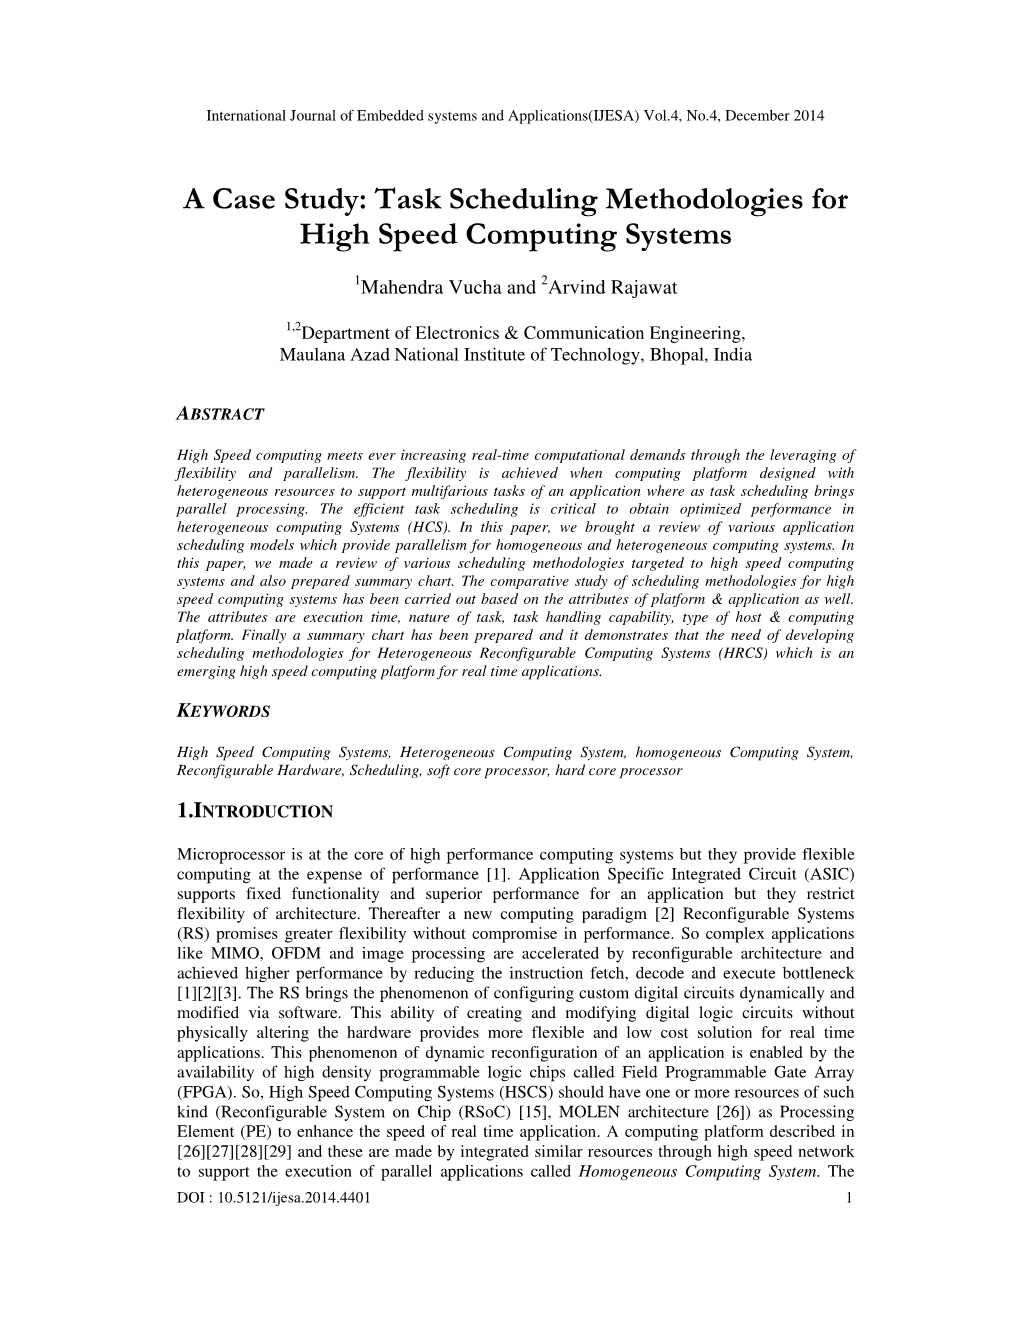 Task Scheduling Methodologies for High Speed Computing Systems